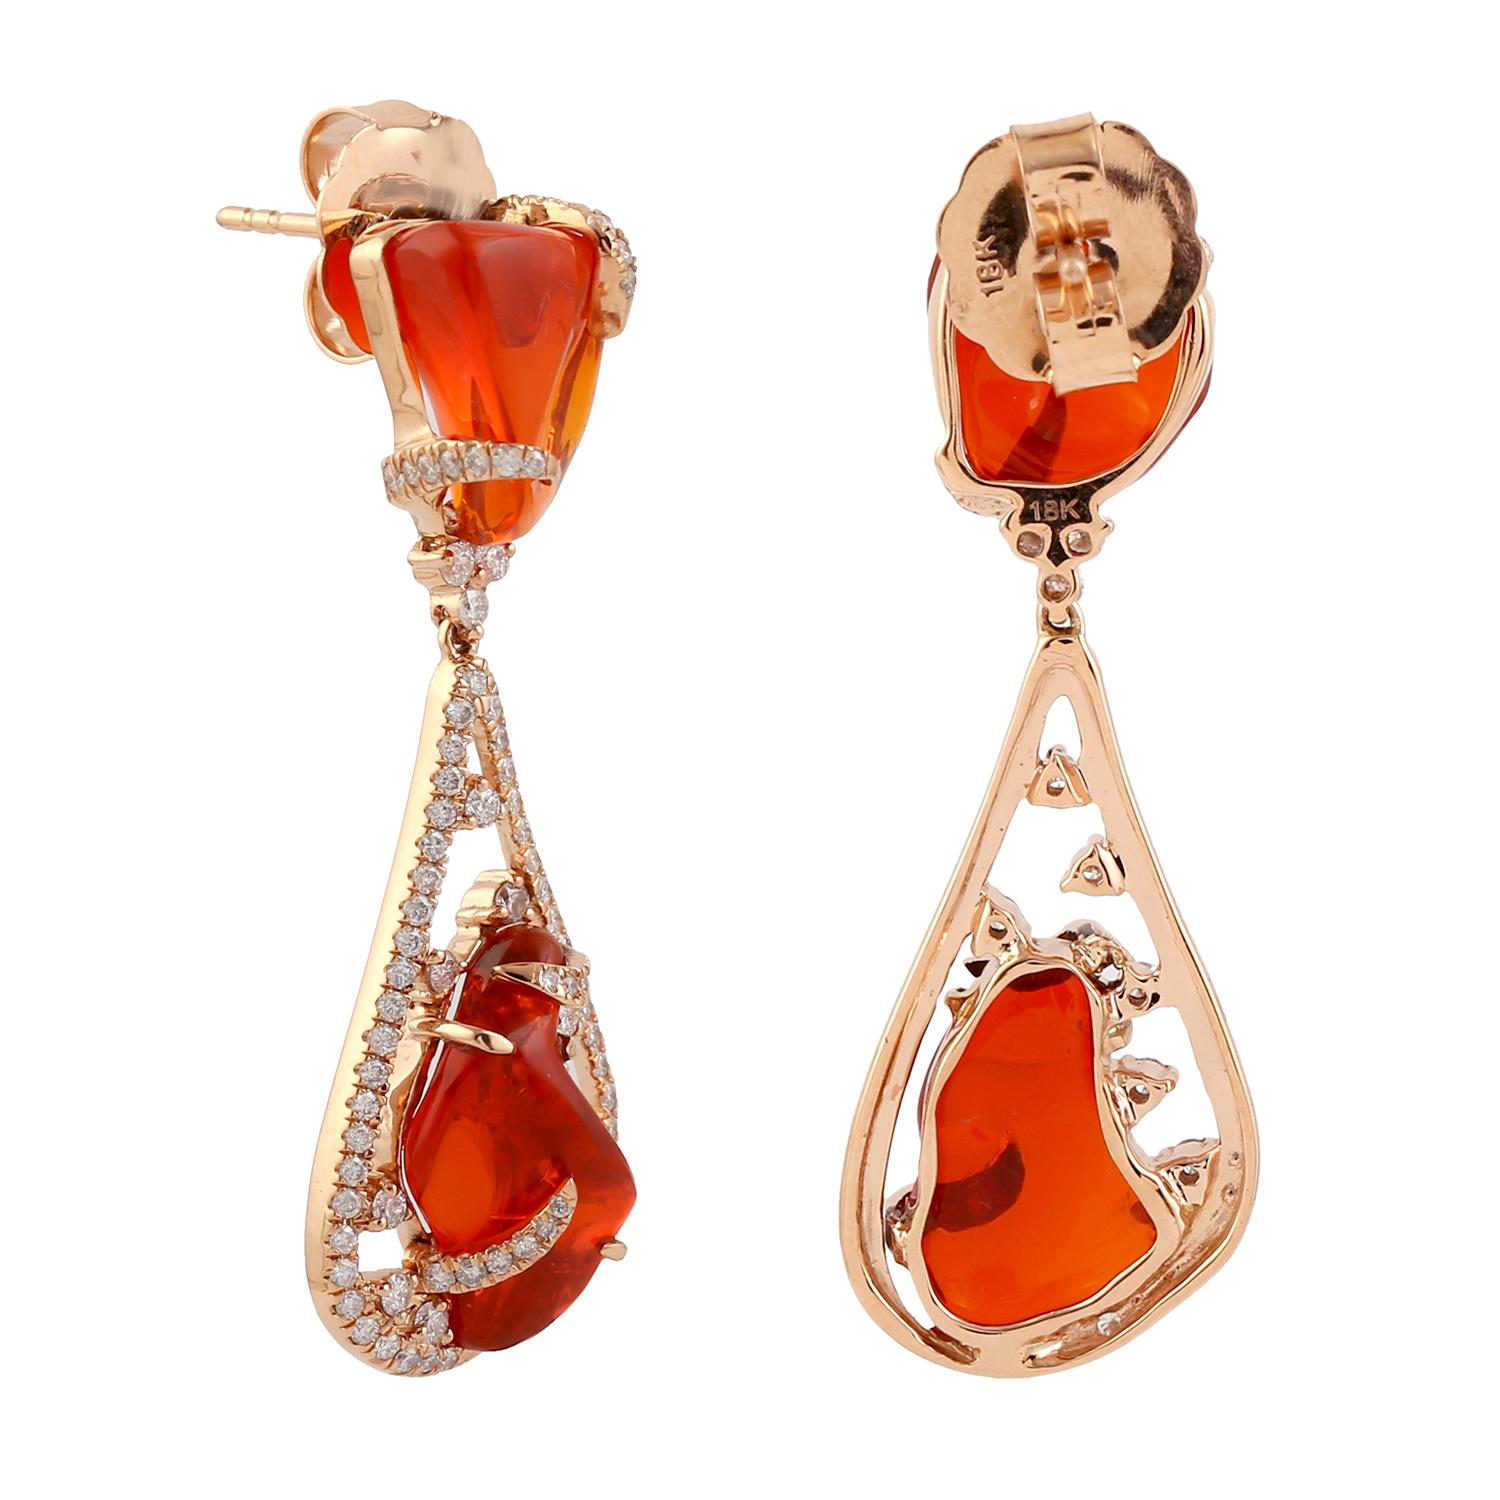 Cast in 18 karat gold. These earrings are hand set in 11.02 carats fire opal and 1.08 carats of sparkling diamonds.

FOLLOW  MEGHNA JEWELS storefront to view the latest collection & exclusive pieces.  Meghna Jewels is proudly rated as a Top Seller